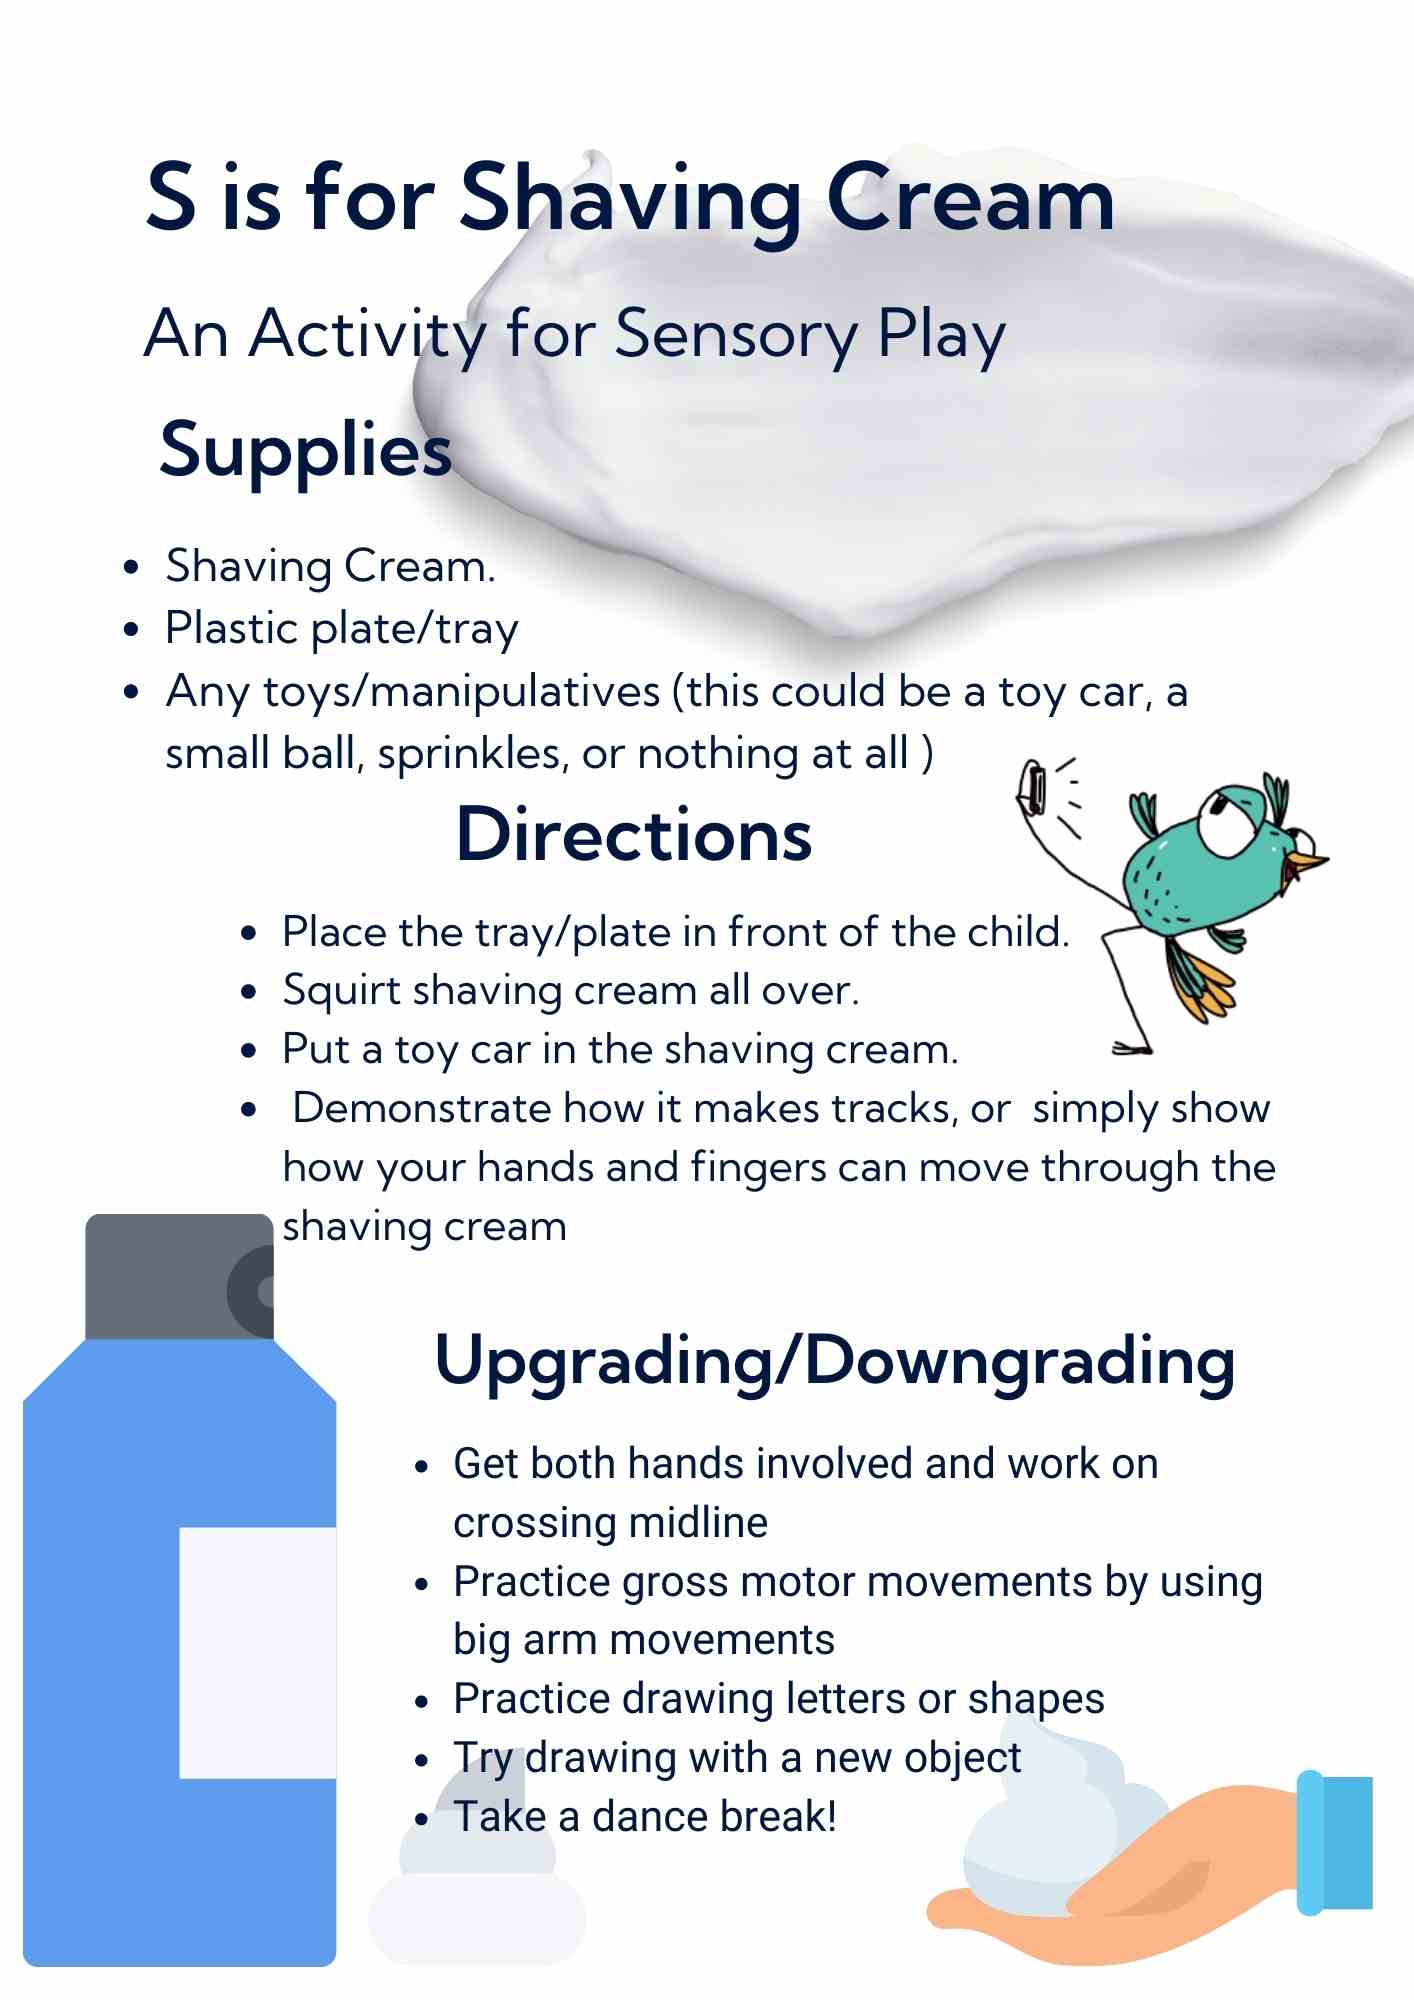 S is For Shaving Cream - A Sensory Activity image